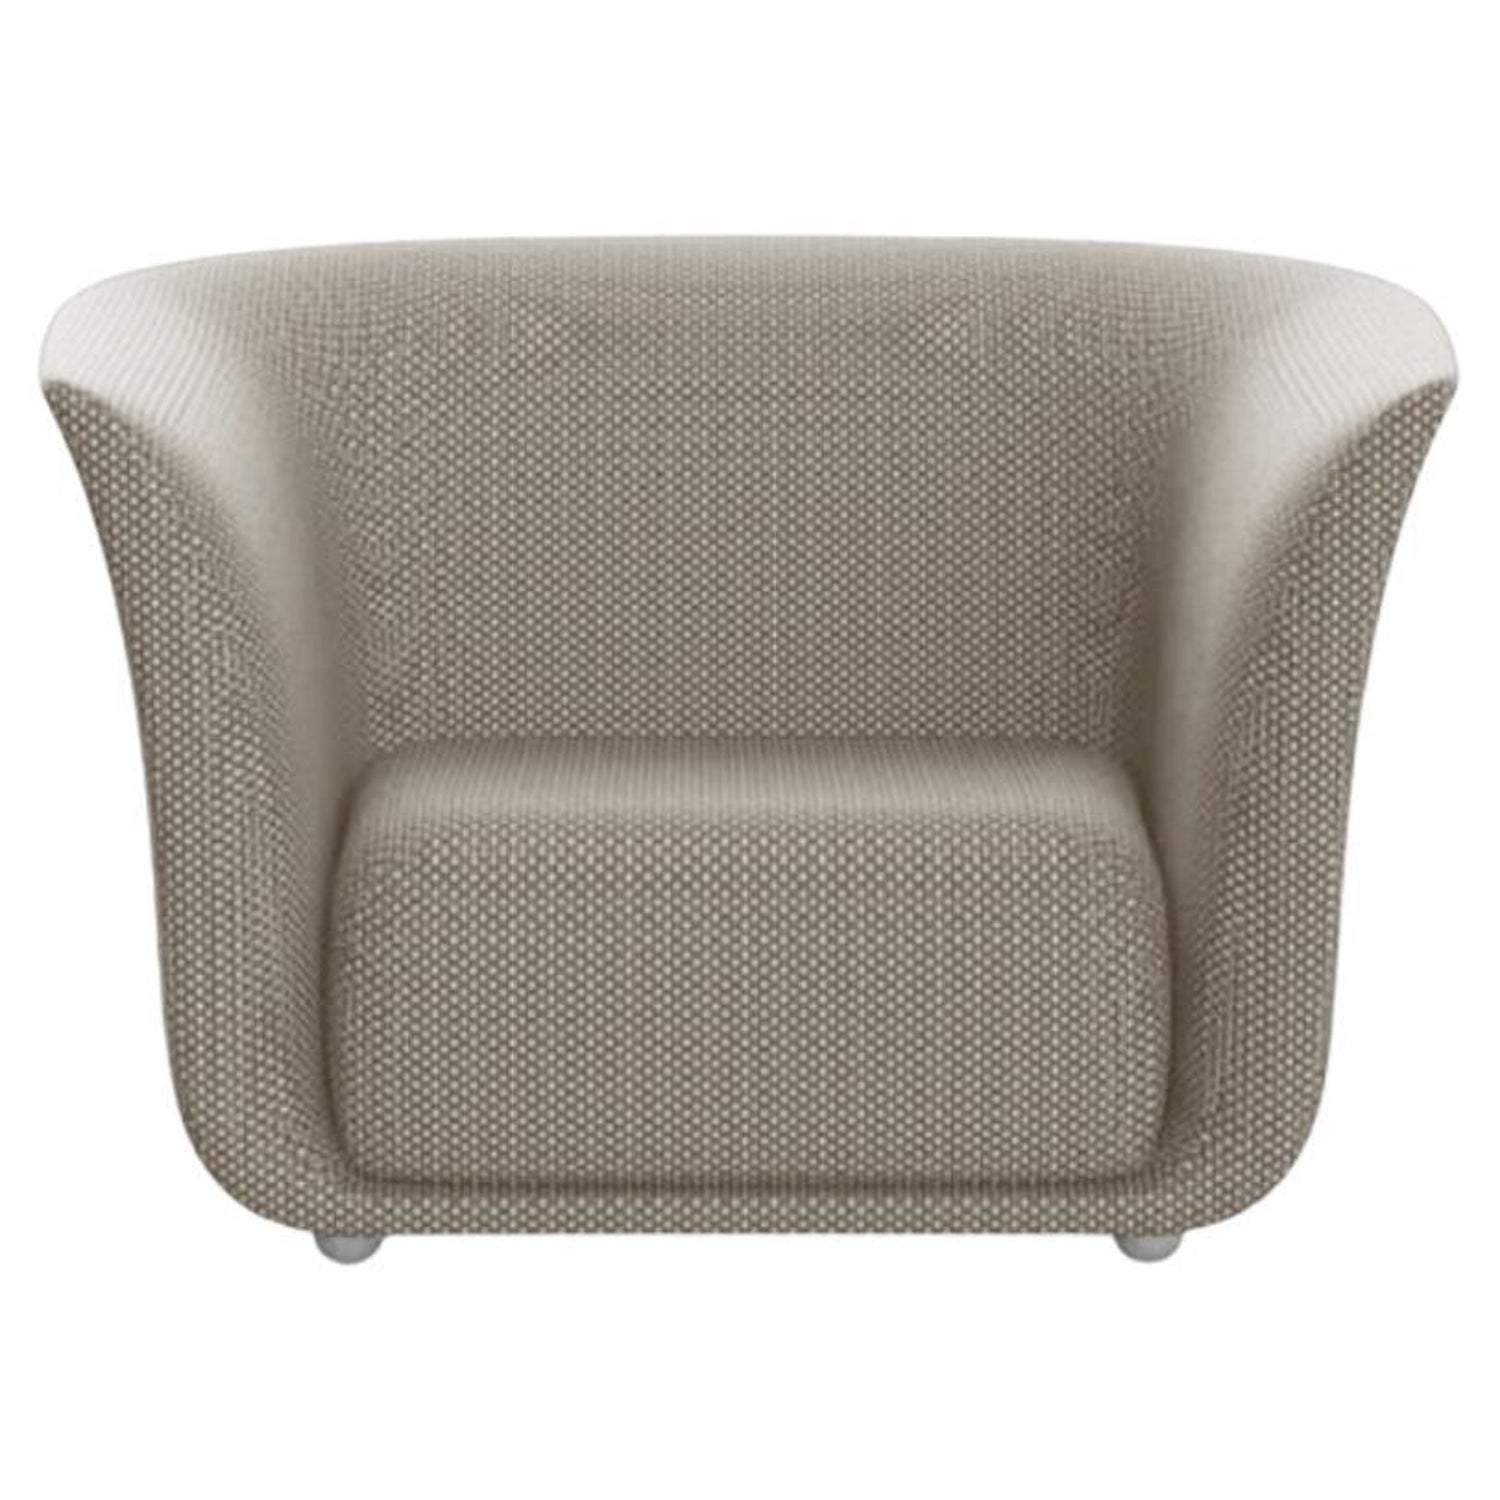 405: MARCEL WANDERS FOR LOUIS VUITTON, Lounge chair from the Objets Nomades  Collection < Luxury, 14 July 2021 < Auctions